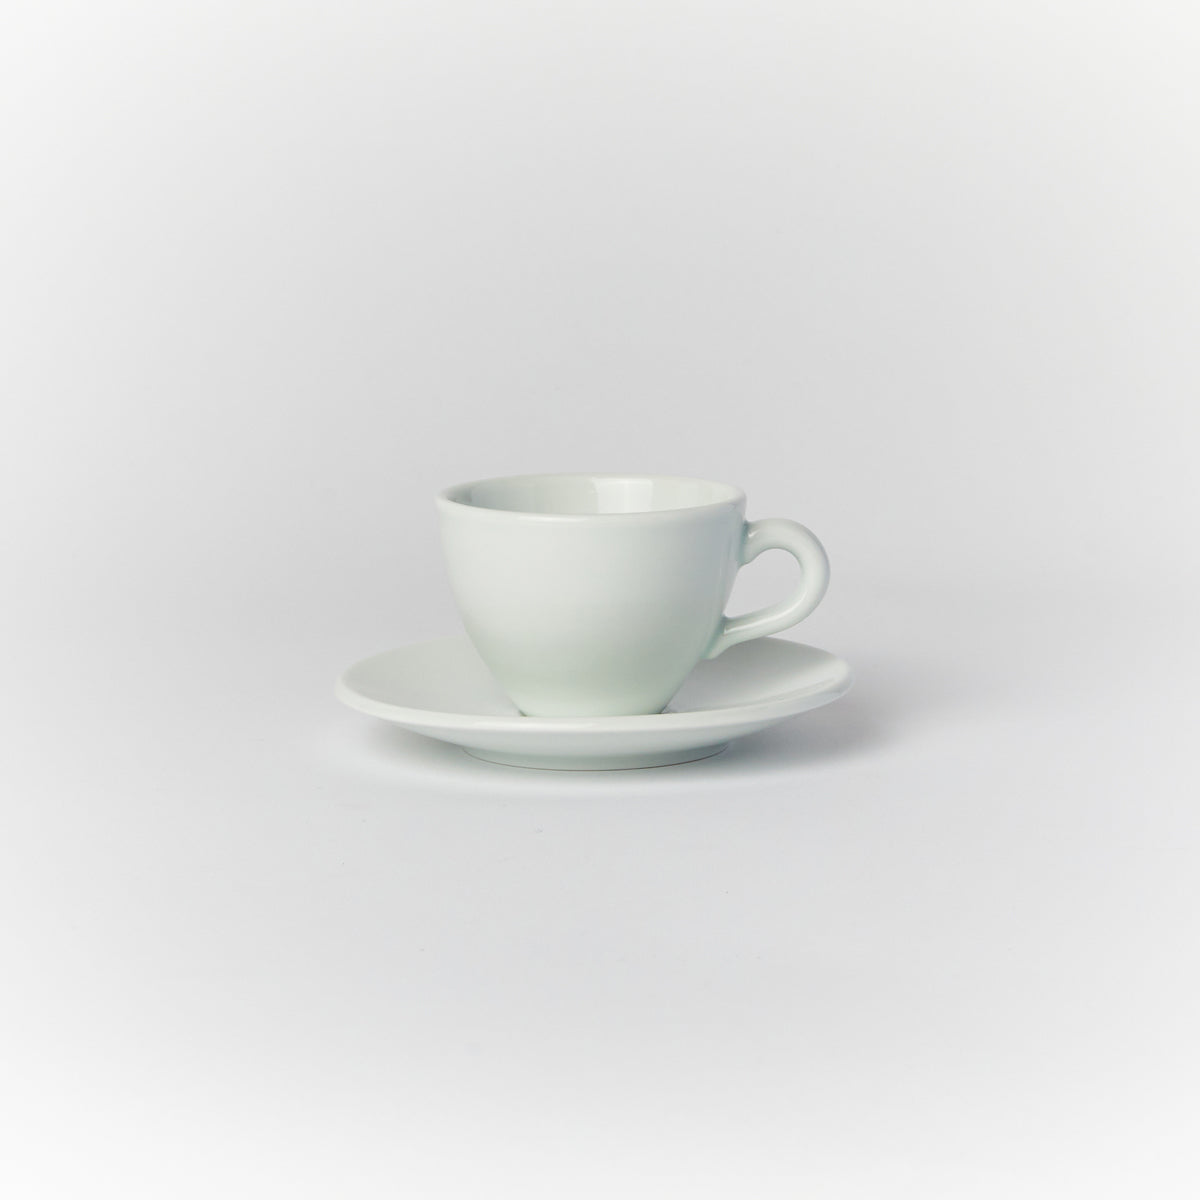 LAMILL Espresso Cups and Saucers – LAMILL COFFEE